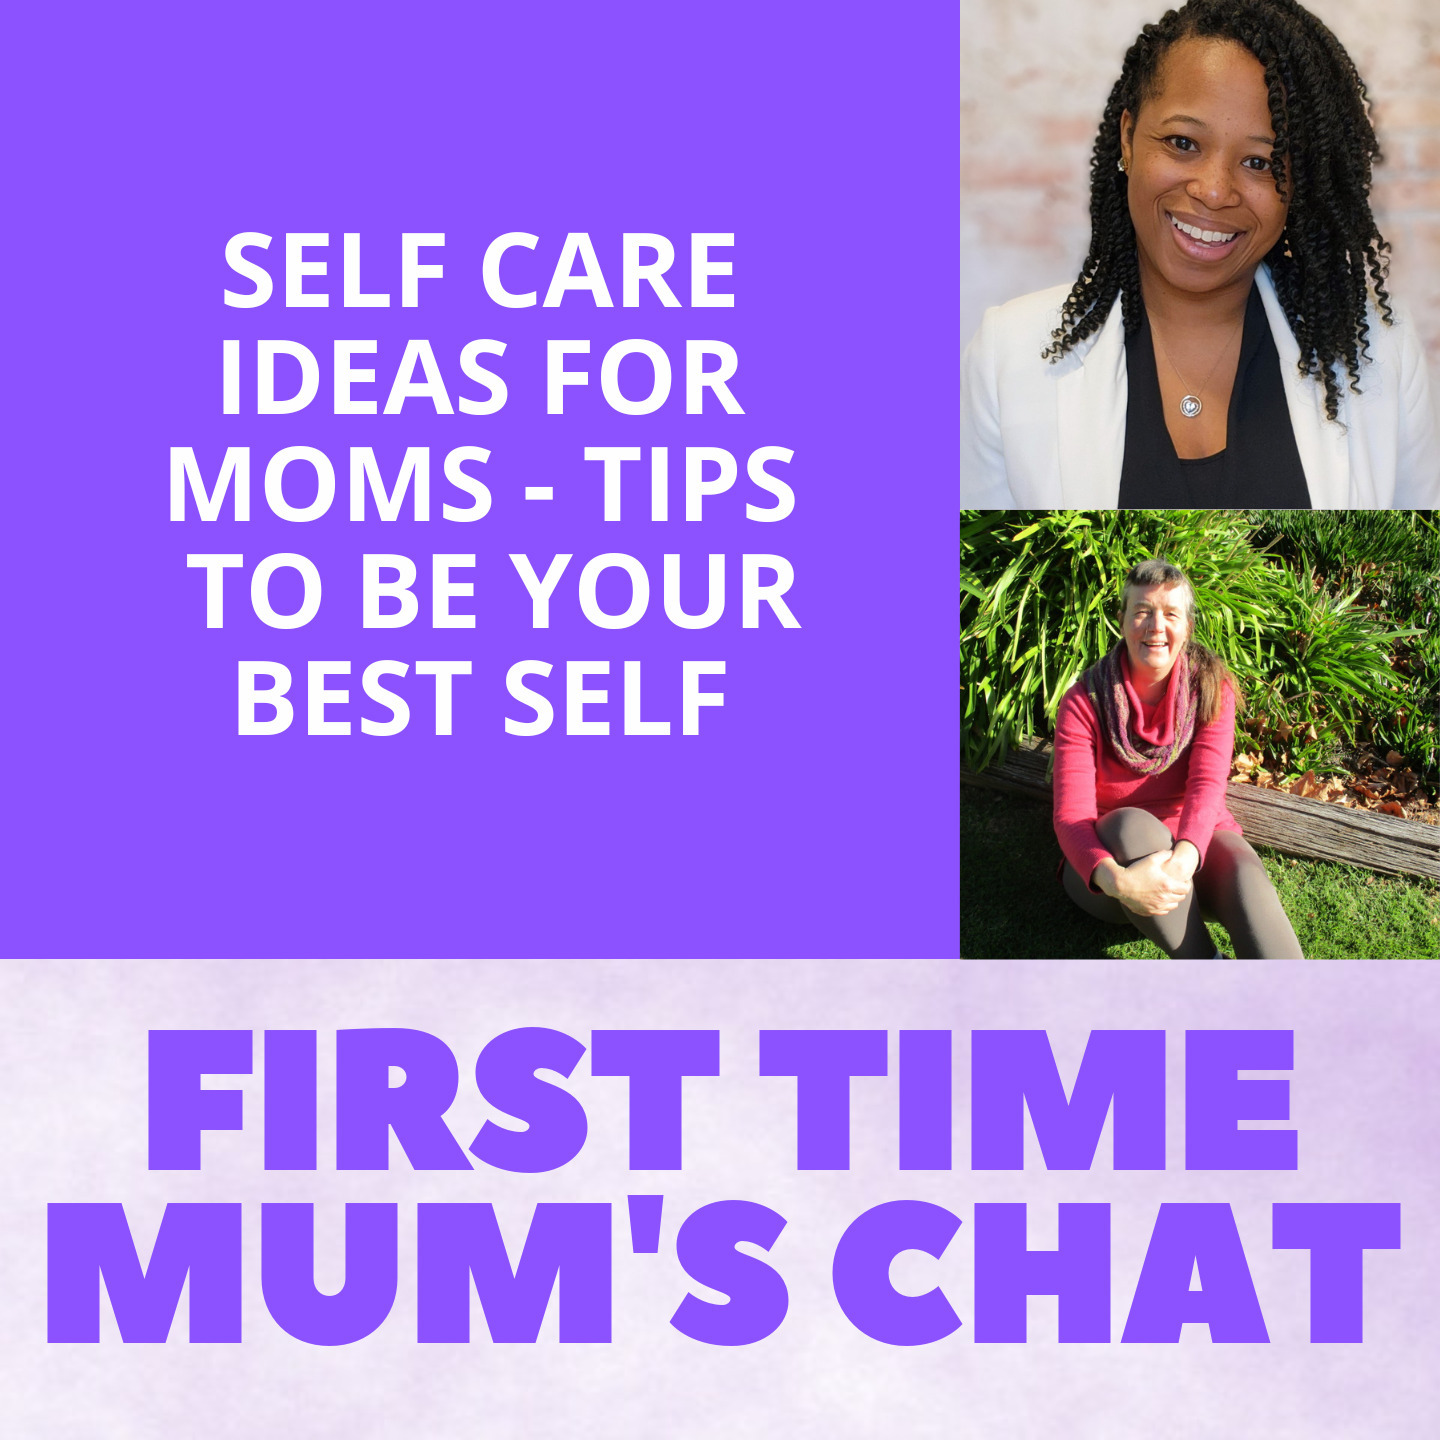 Self Care Ideas For Moms - Tips to Be Your Best Self